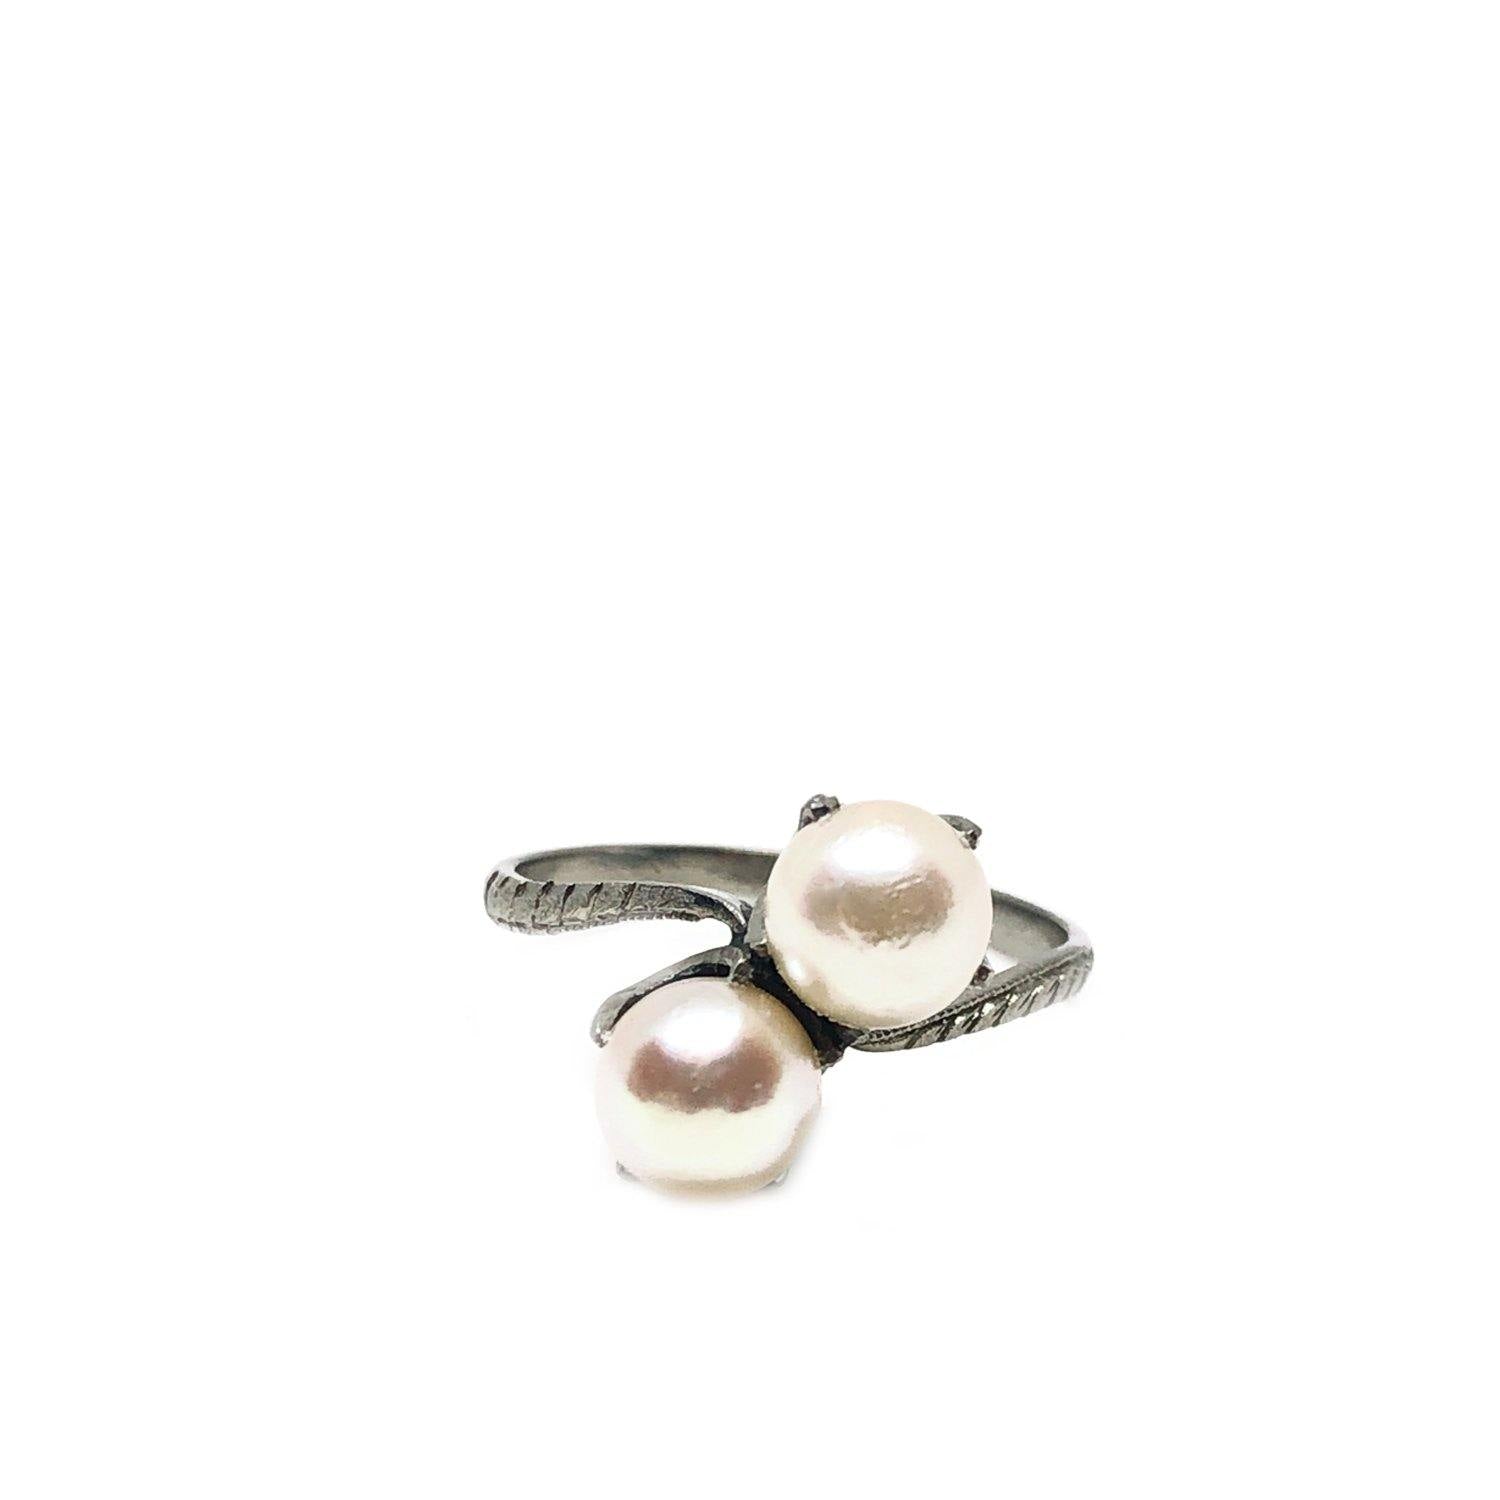 Claw Prong Bypass Japanese Saltwater Cultured Akoya Pearl Ring- Sterling Silver Sz 6 1/2